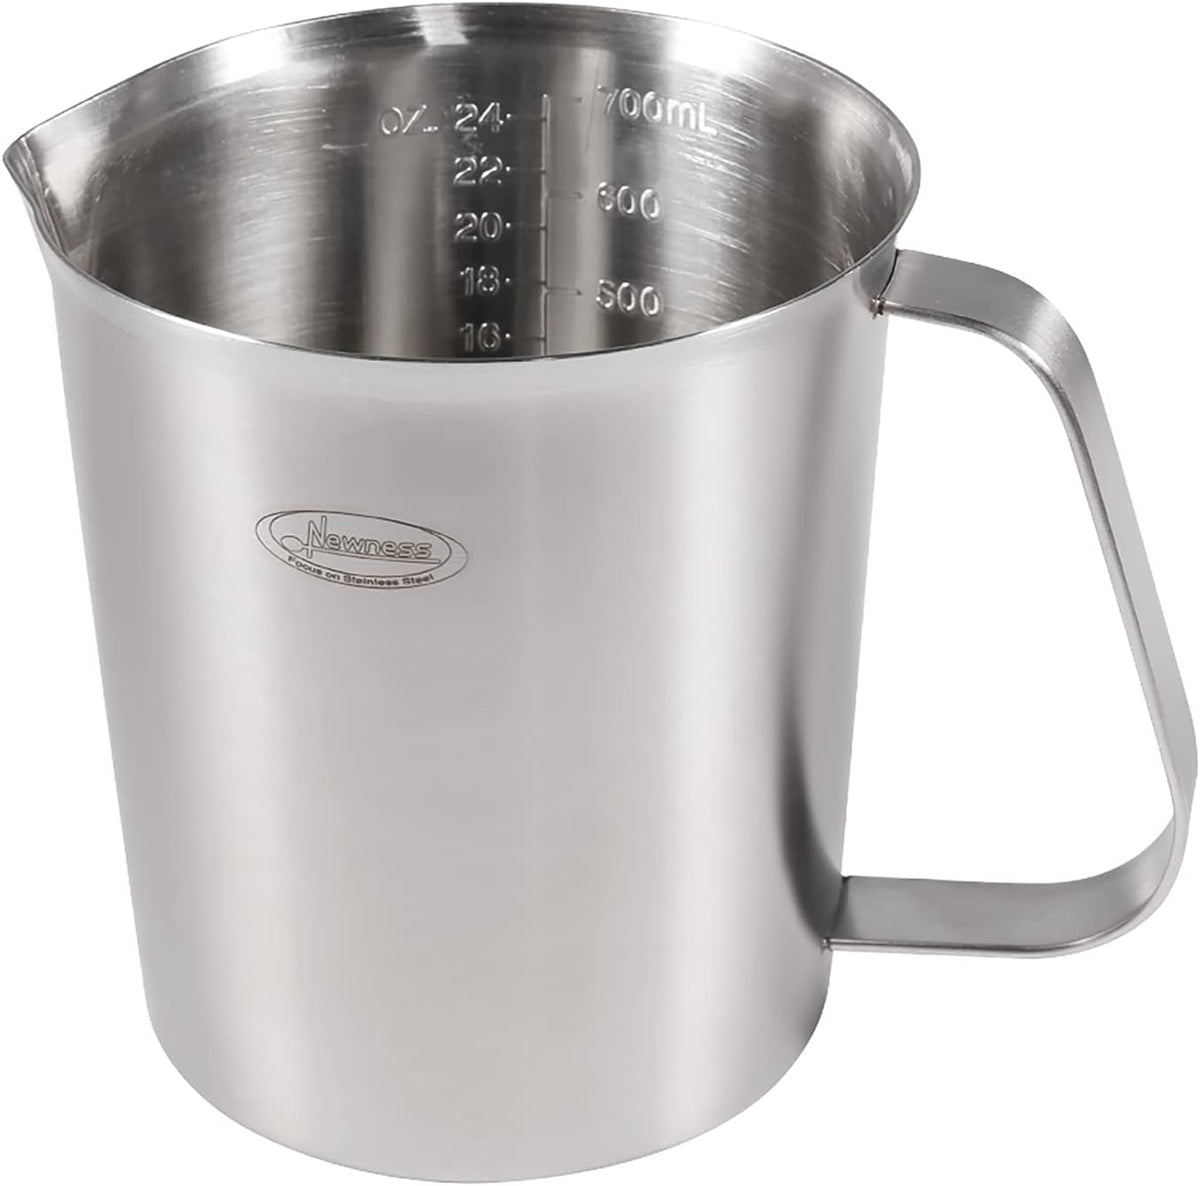 Newness Stainless Steel Measuring Cup